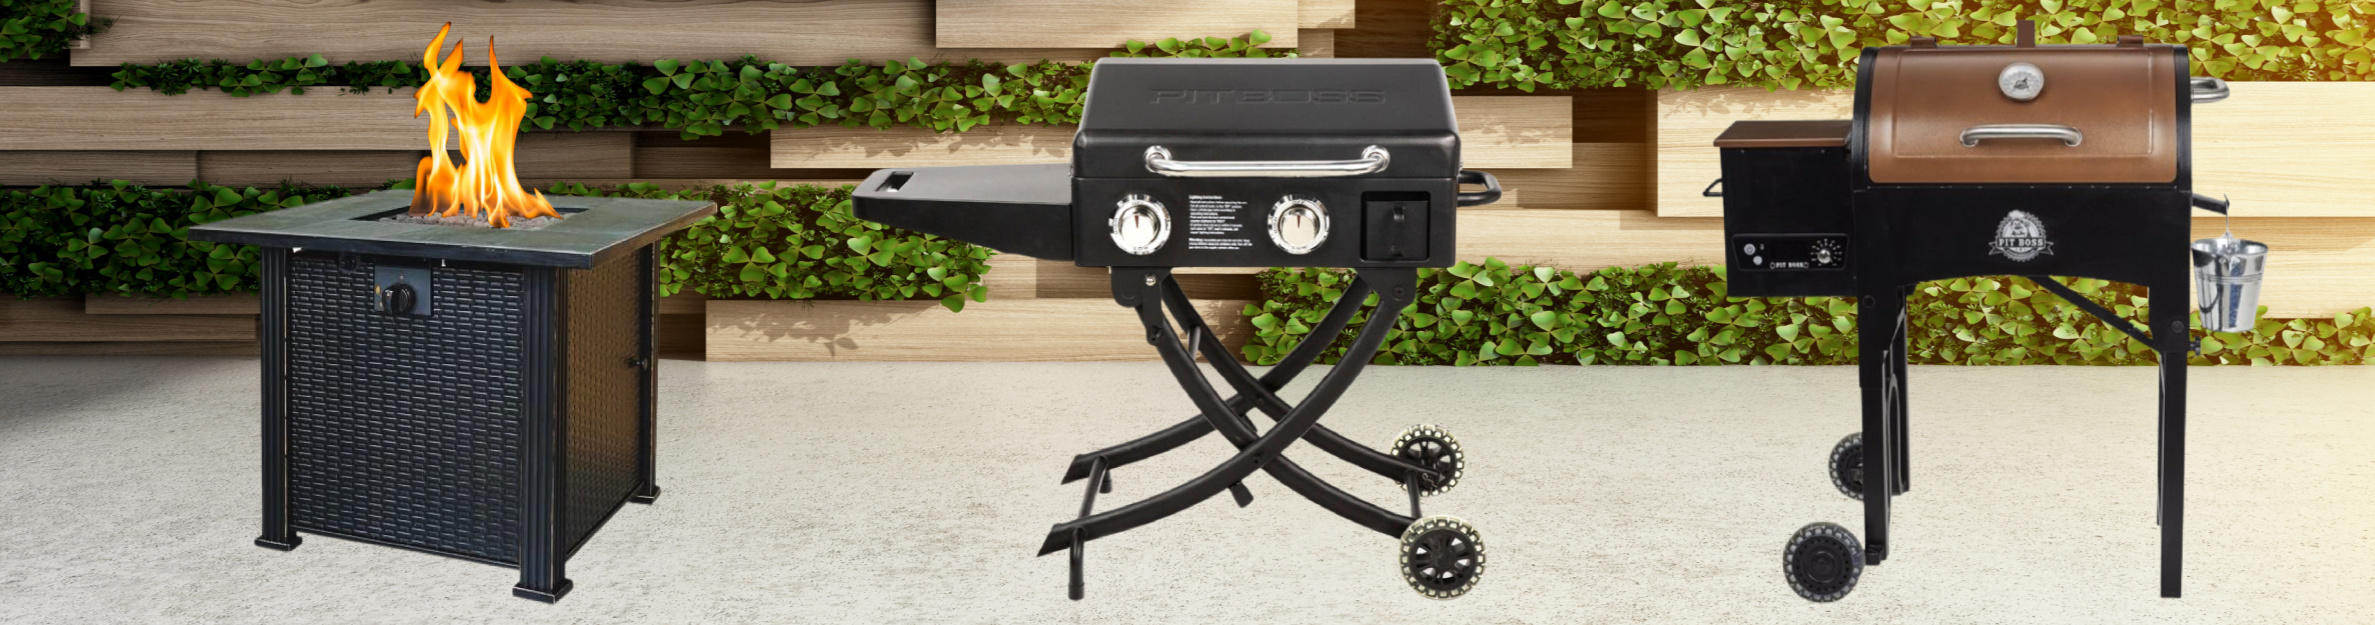 Photo of fire pit, griddle, and grill